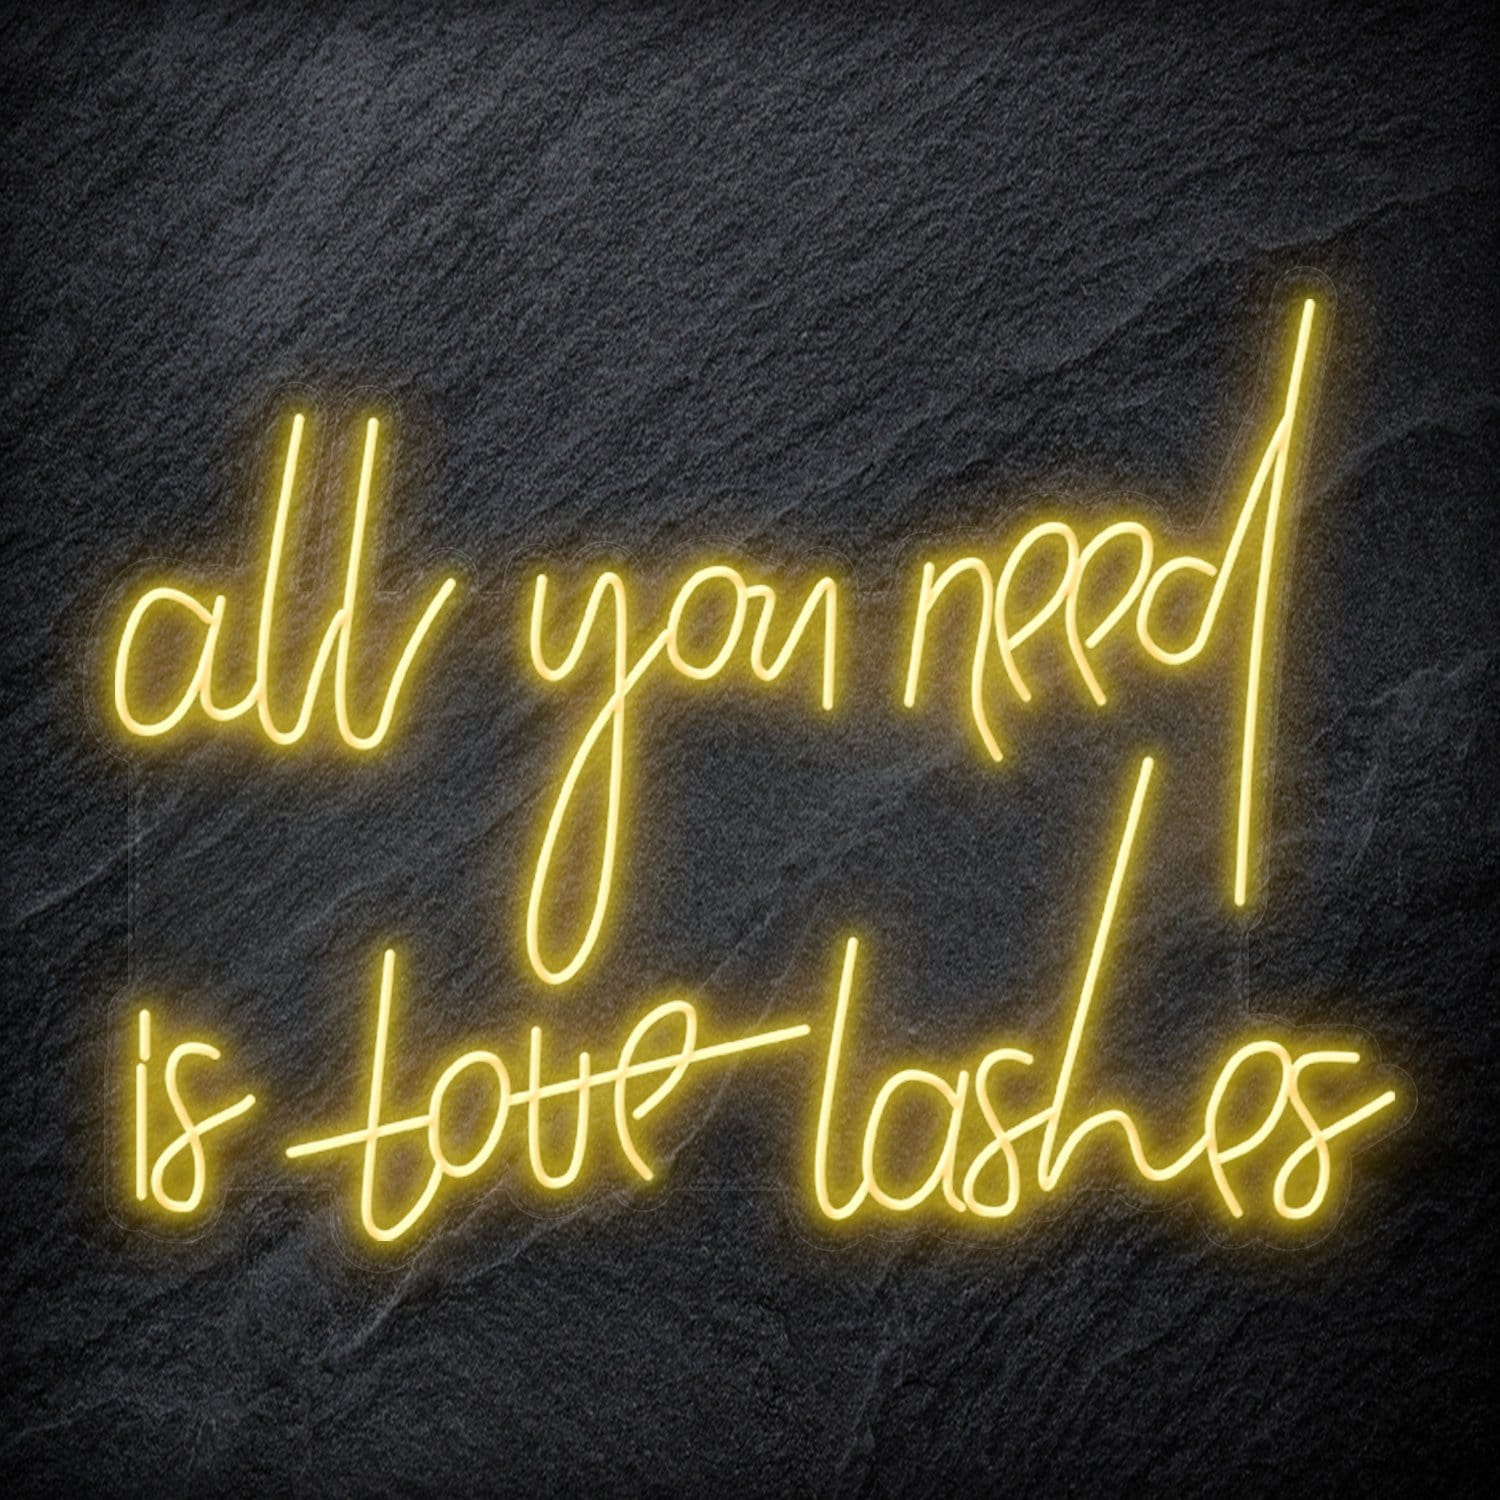 "All You Need is Lashes" LED Neon Schriftzug - NEONEVERGLOW